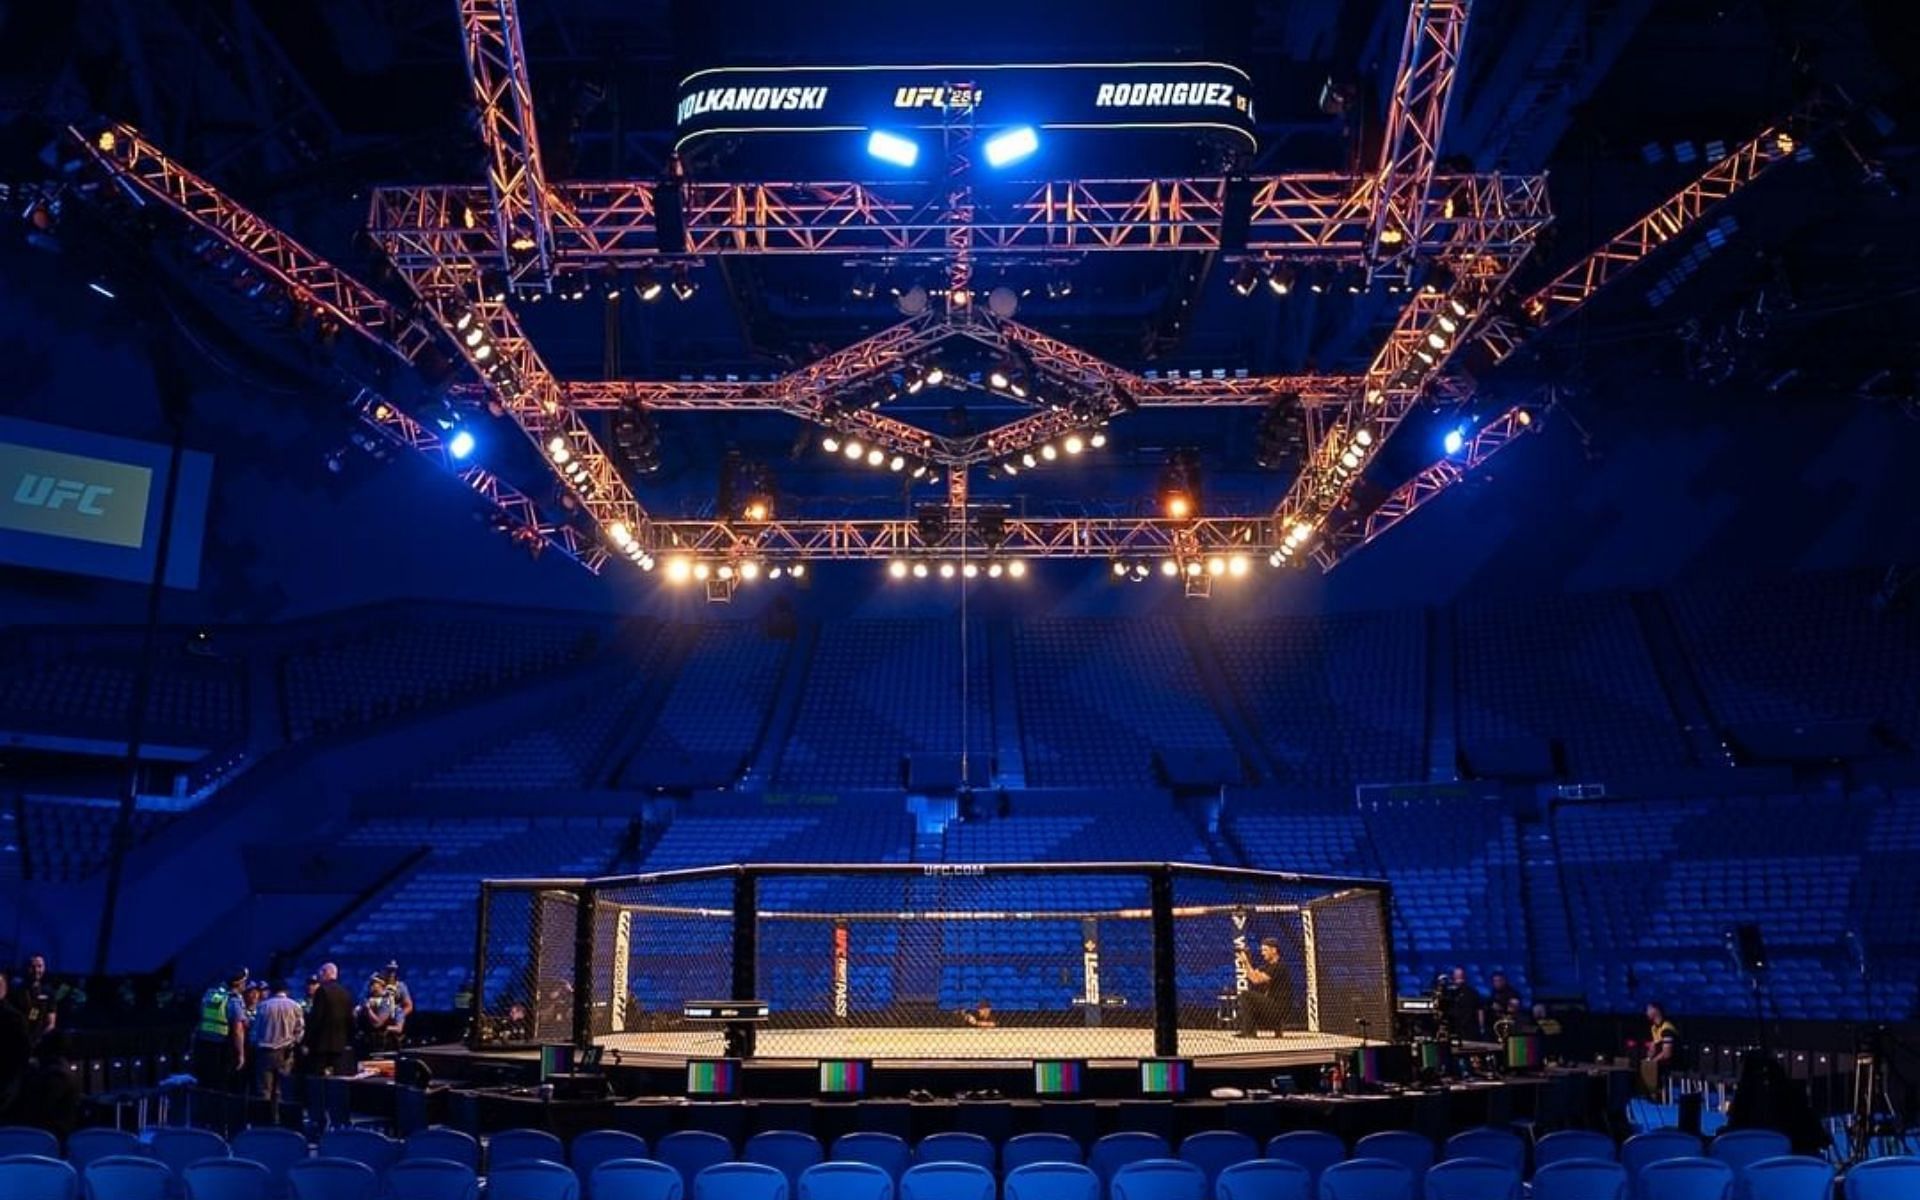 The UFC 284 octagon in the RAC Arena in Perth